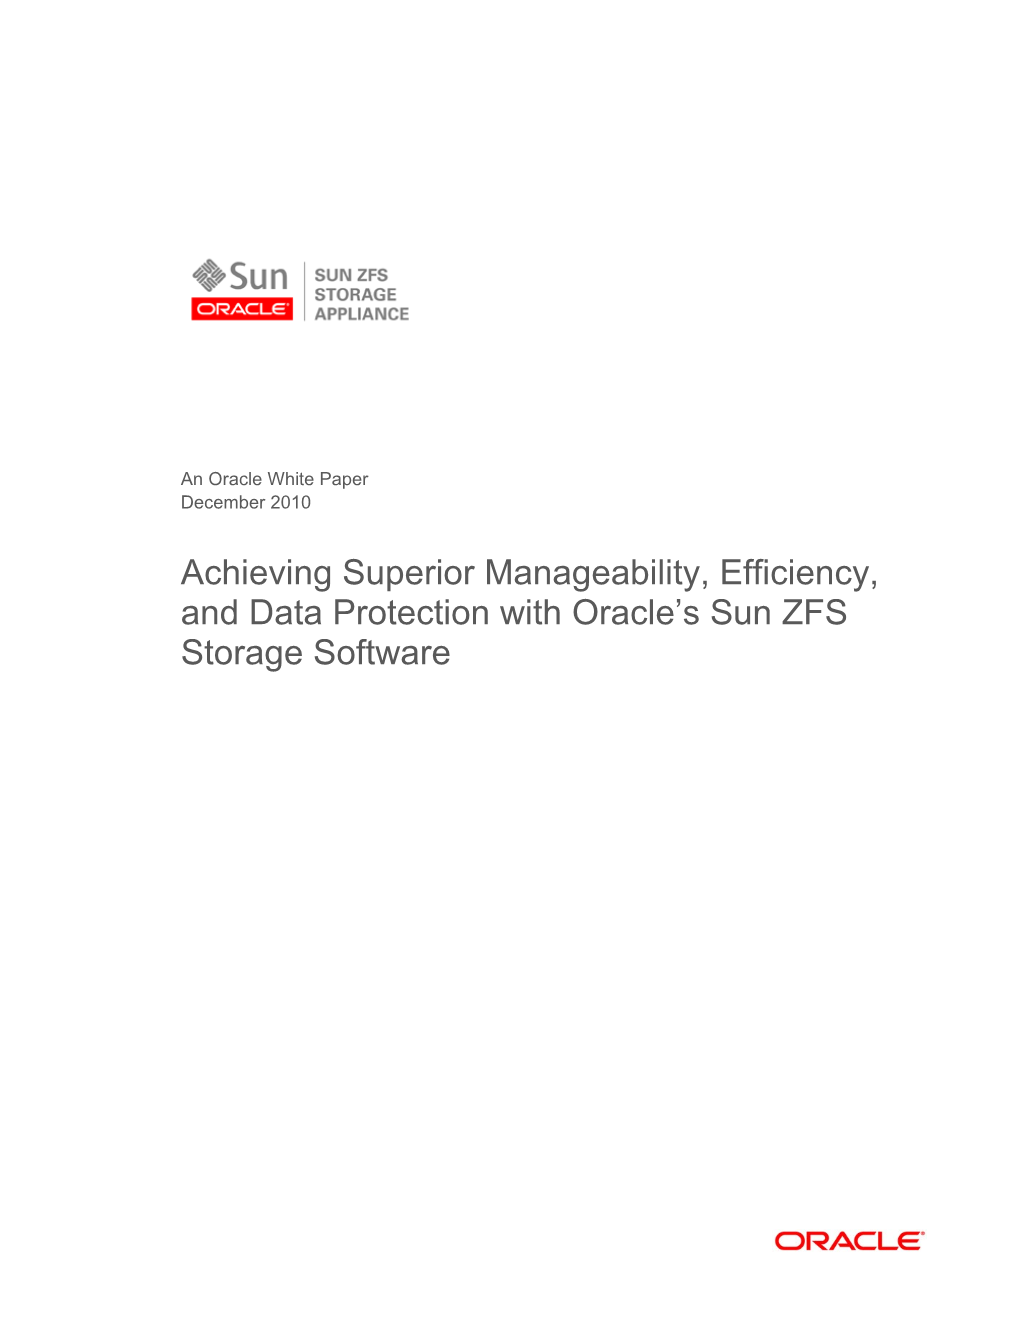 Achieving Superior Manageability, Efficiency, and Data Protection With